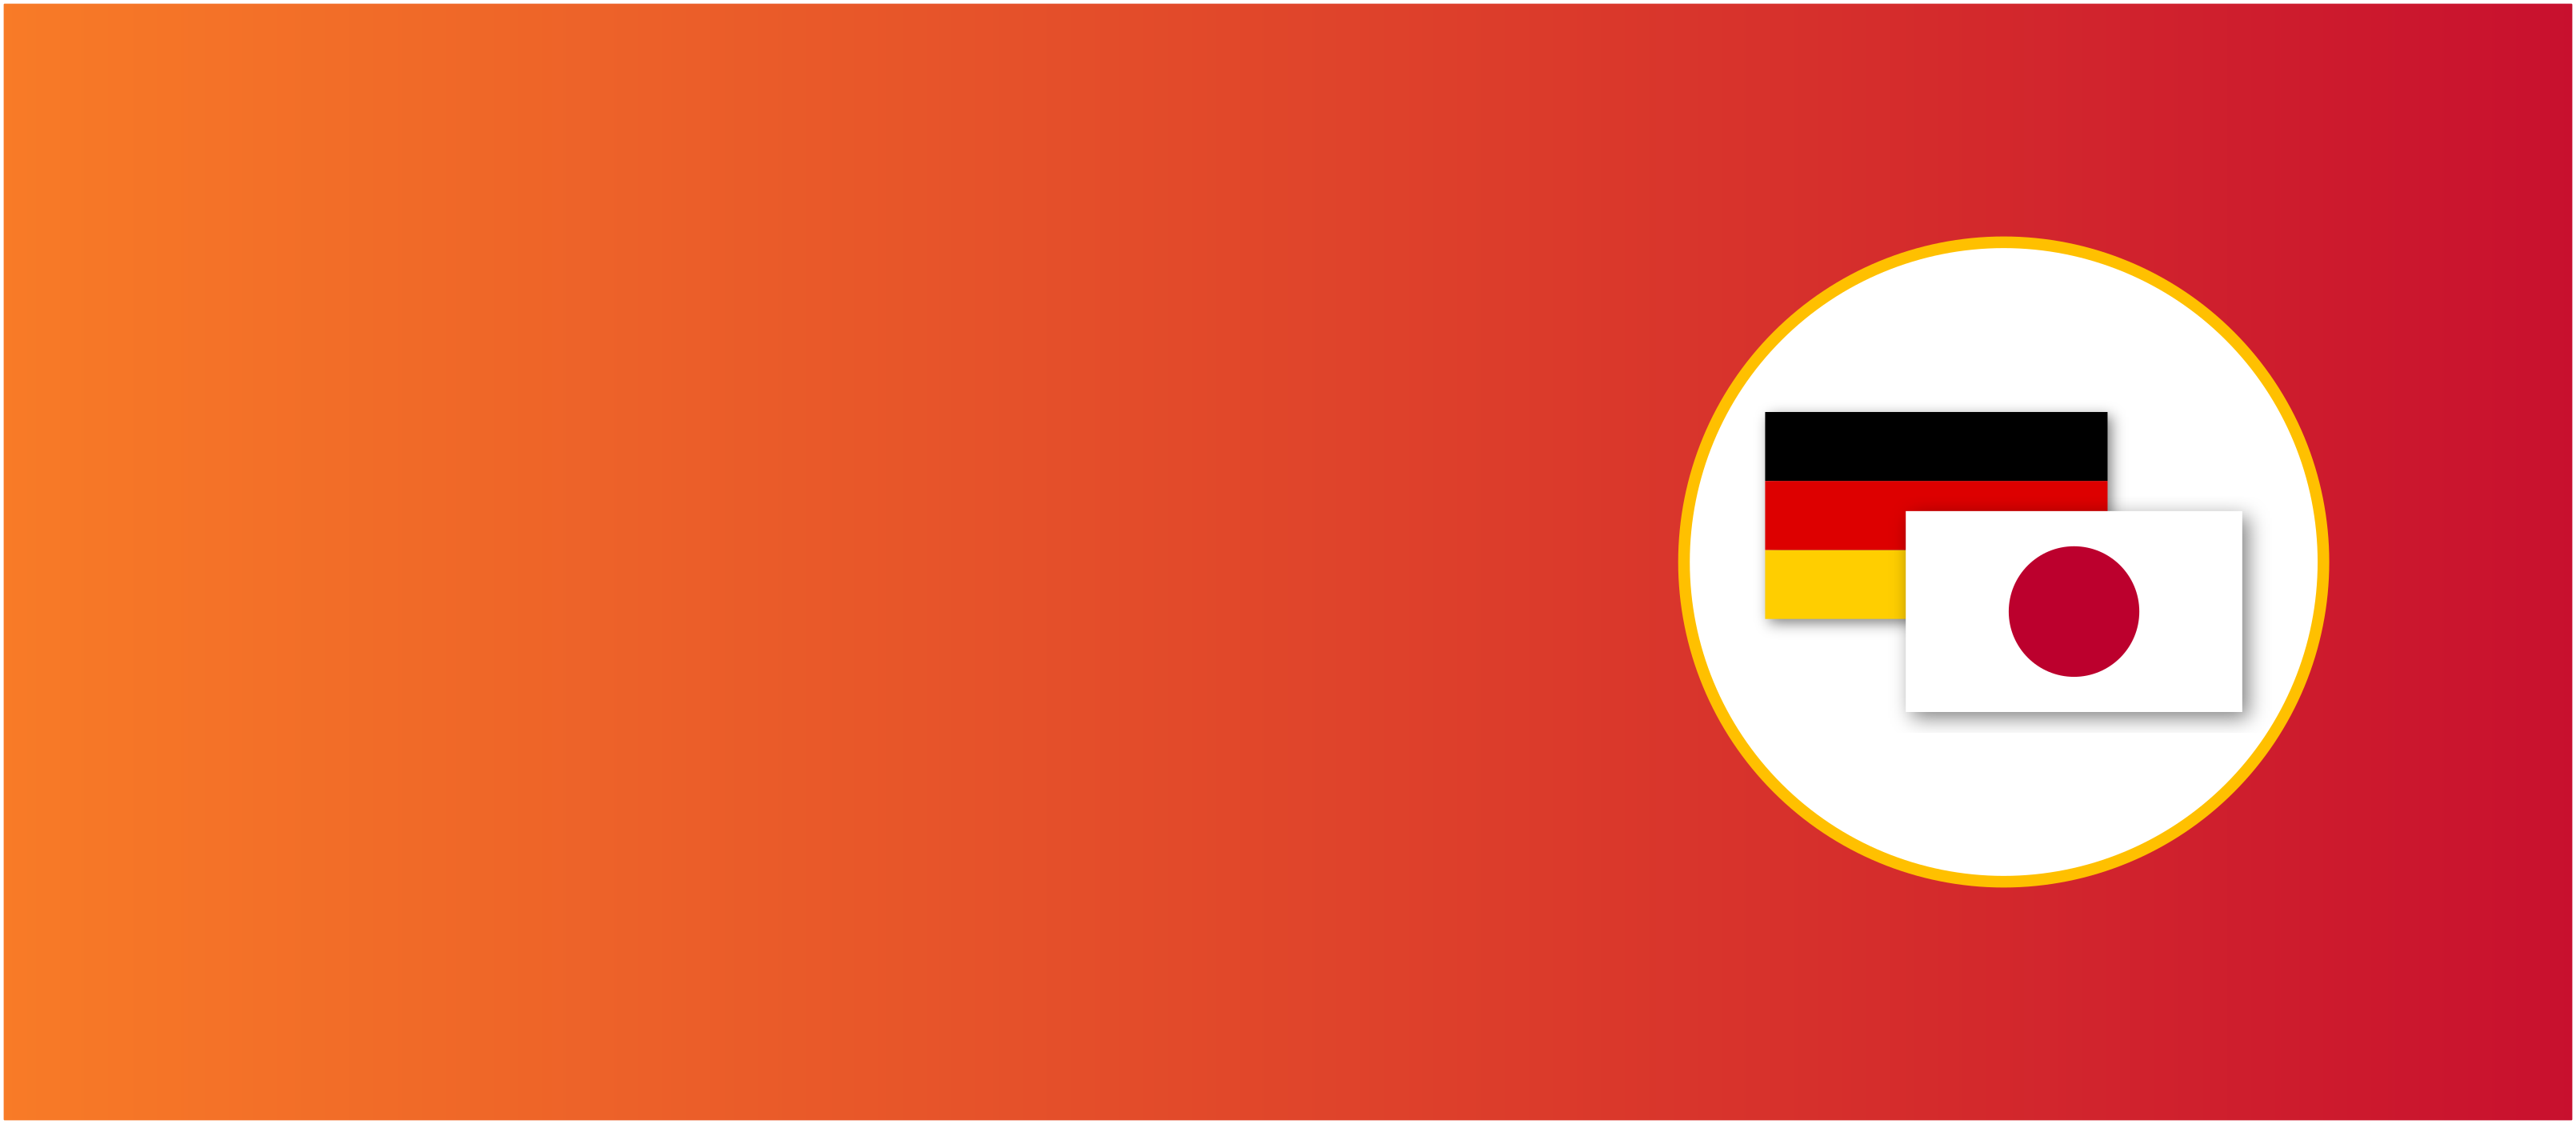 German and Japanese flag icons on a background of orange-to-red gradient